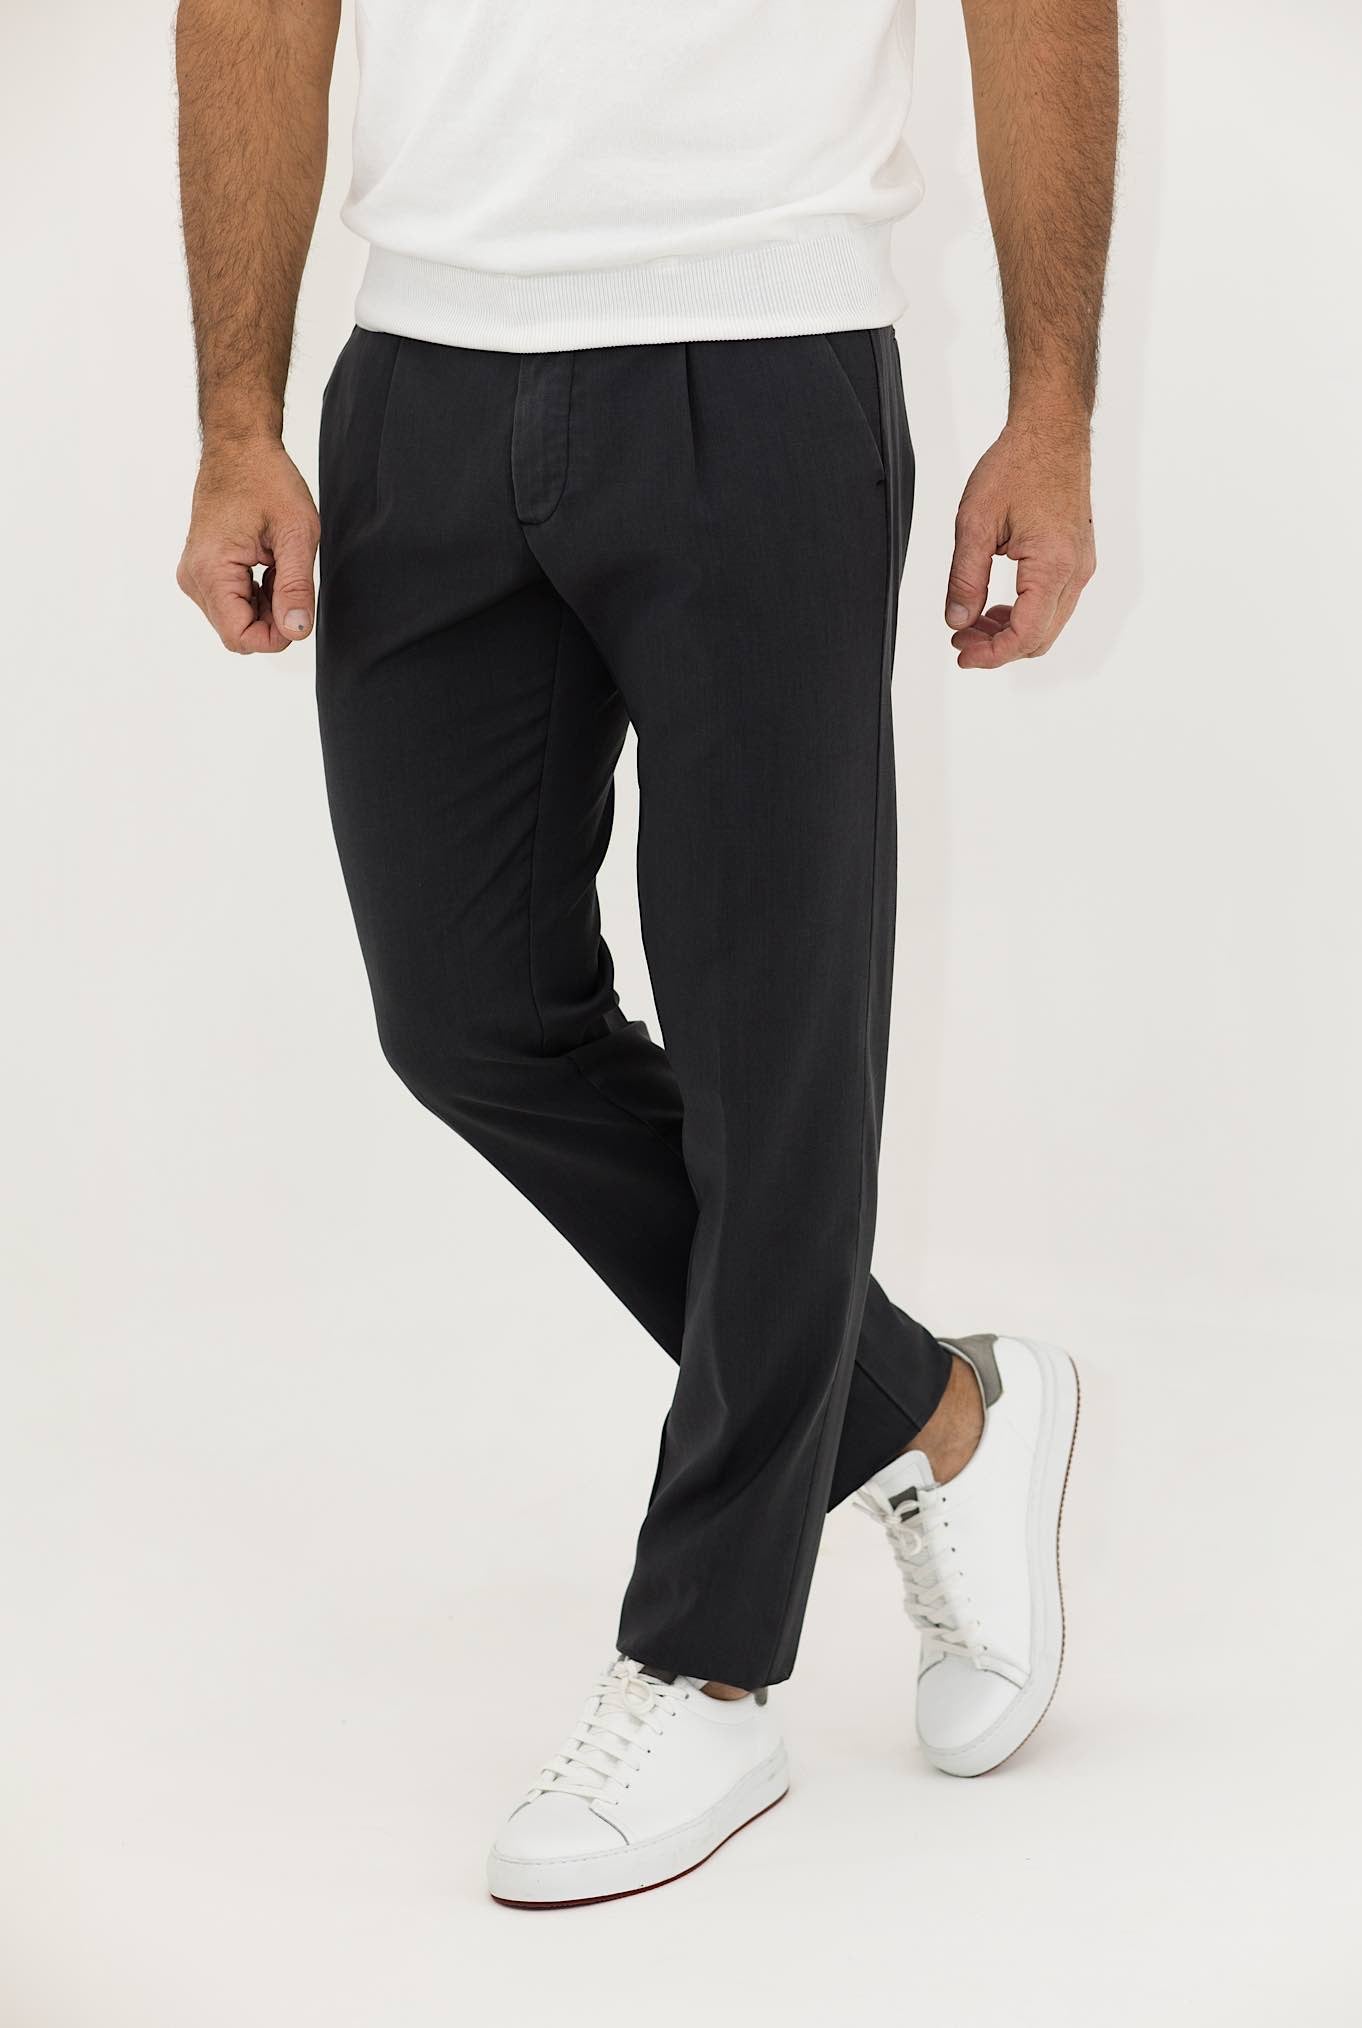 MYTHS Fresco Wool Trousers with Black Pleats